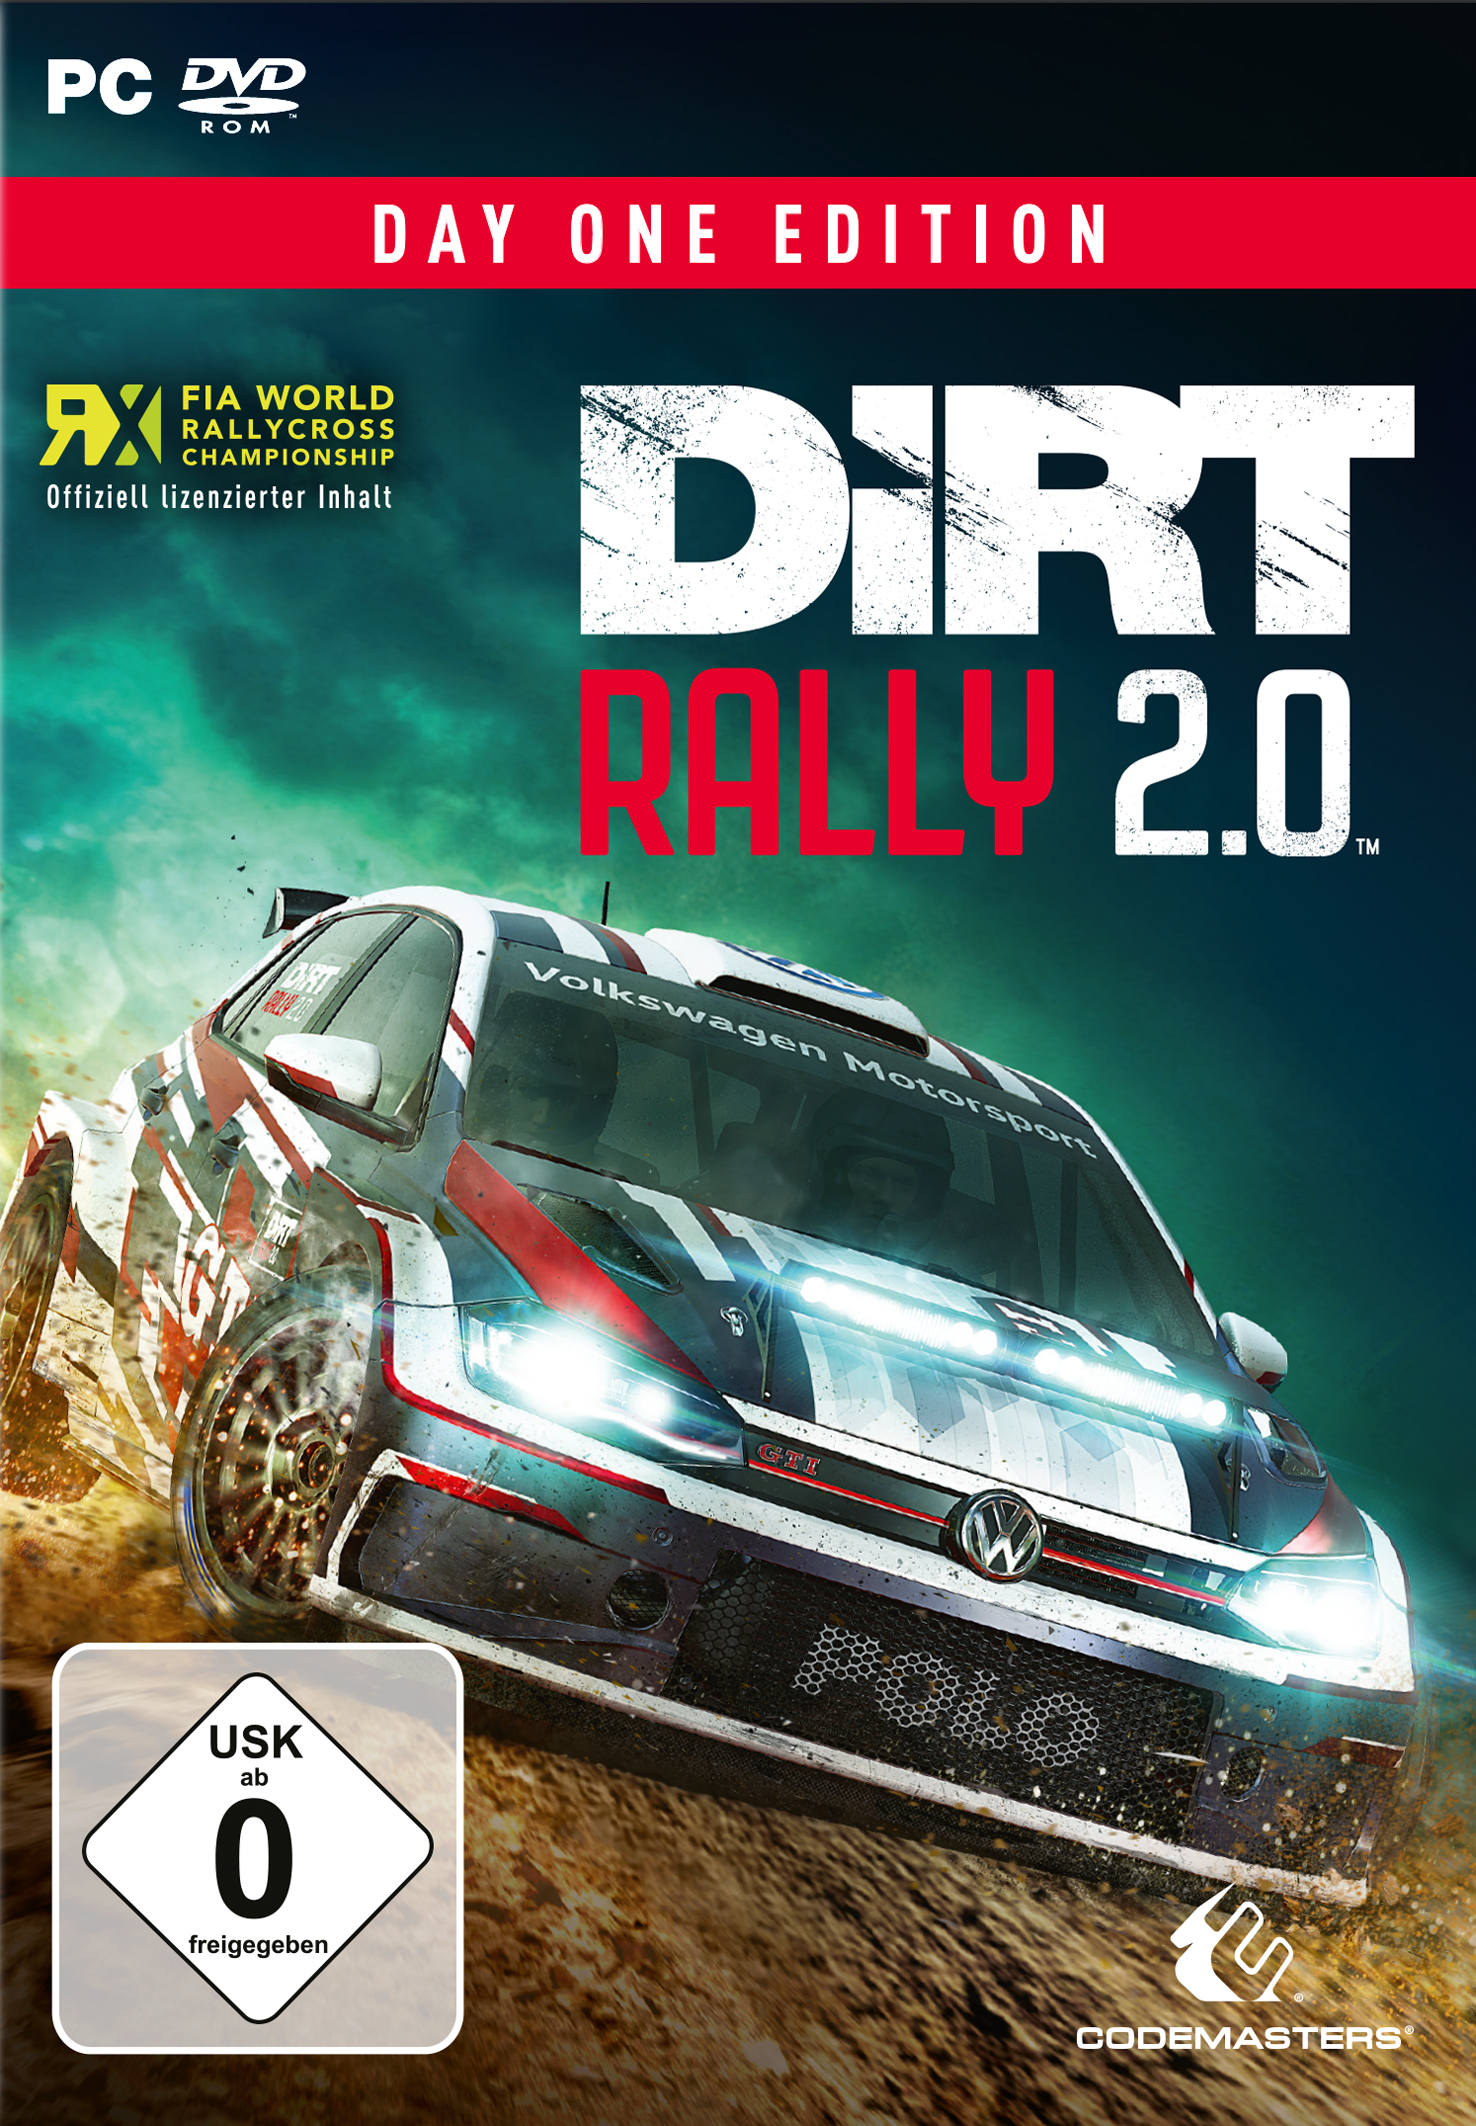 - EDITION 2.0 ONE DAY DIRT [PC] RALLY